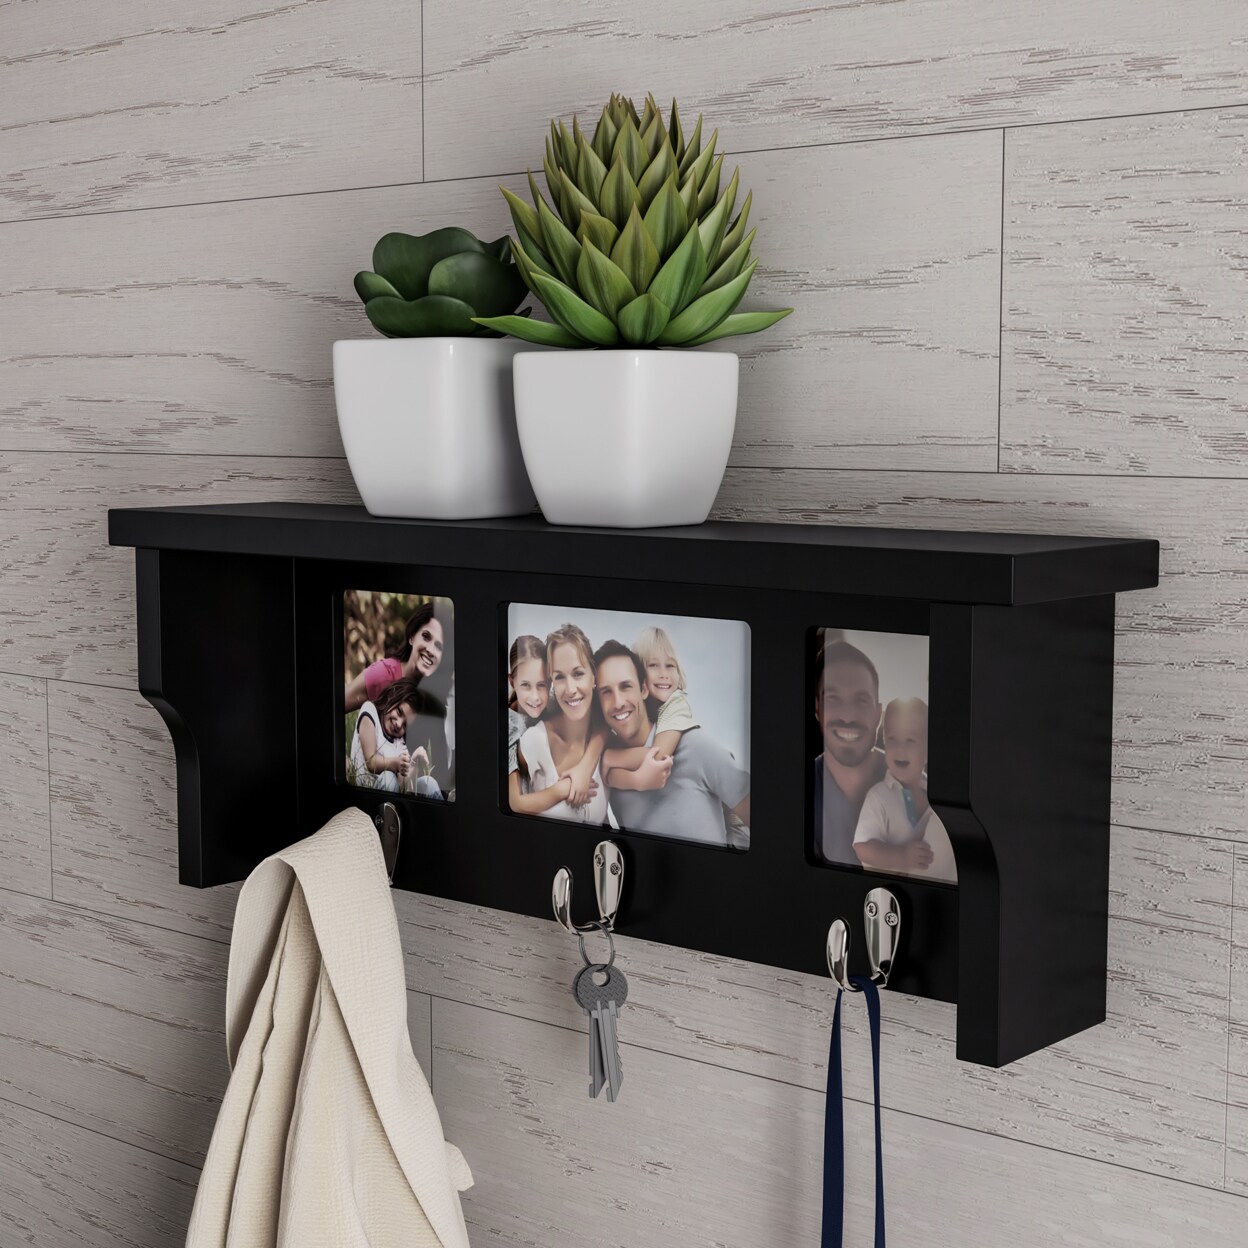 Lavish Home Black Wall Shelf and Picture Collage Ledge and 3 Hanging Hooks- Photo Frame Decor Shelving with Modern Look Holds 3